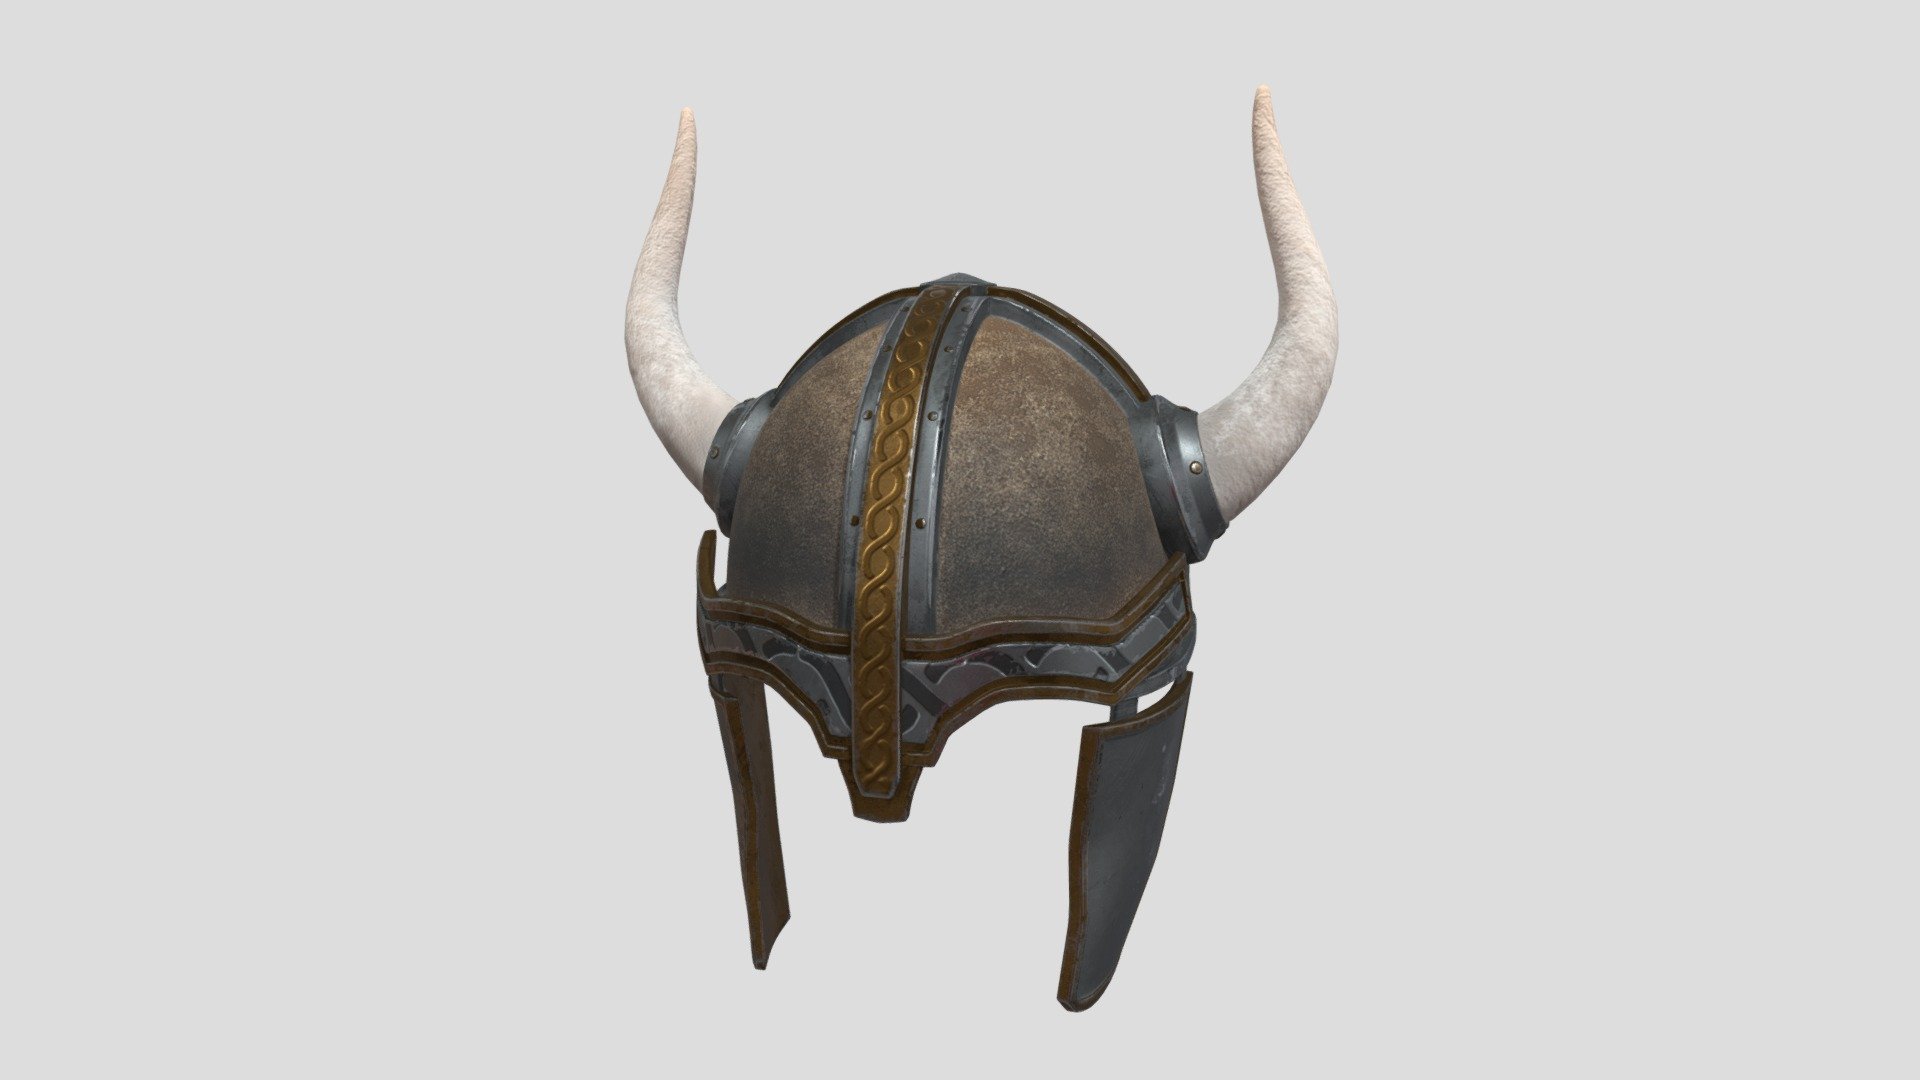 The Vikings (Old Norse: víkingar), also known as the Vikings, have been invading the European coast and the British islands from the 8th century to the 11th century AD. Viking Age 3d model